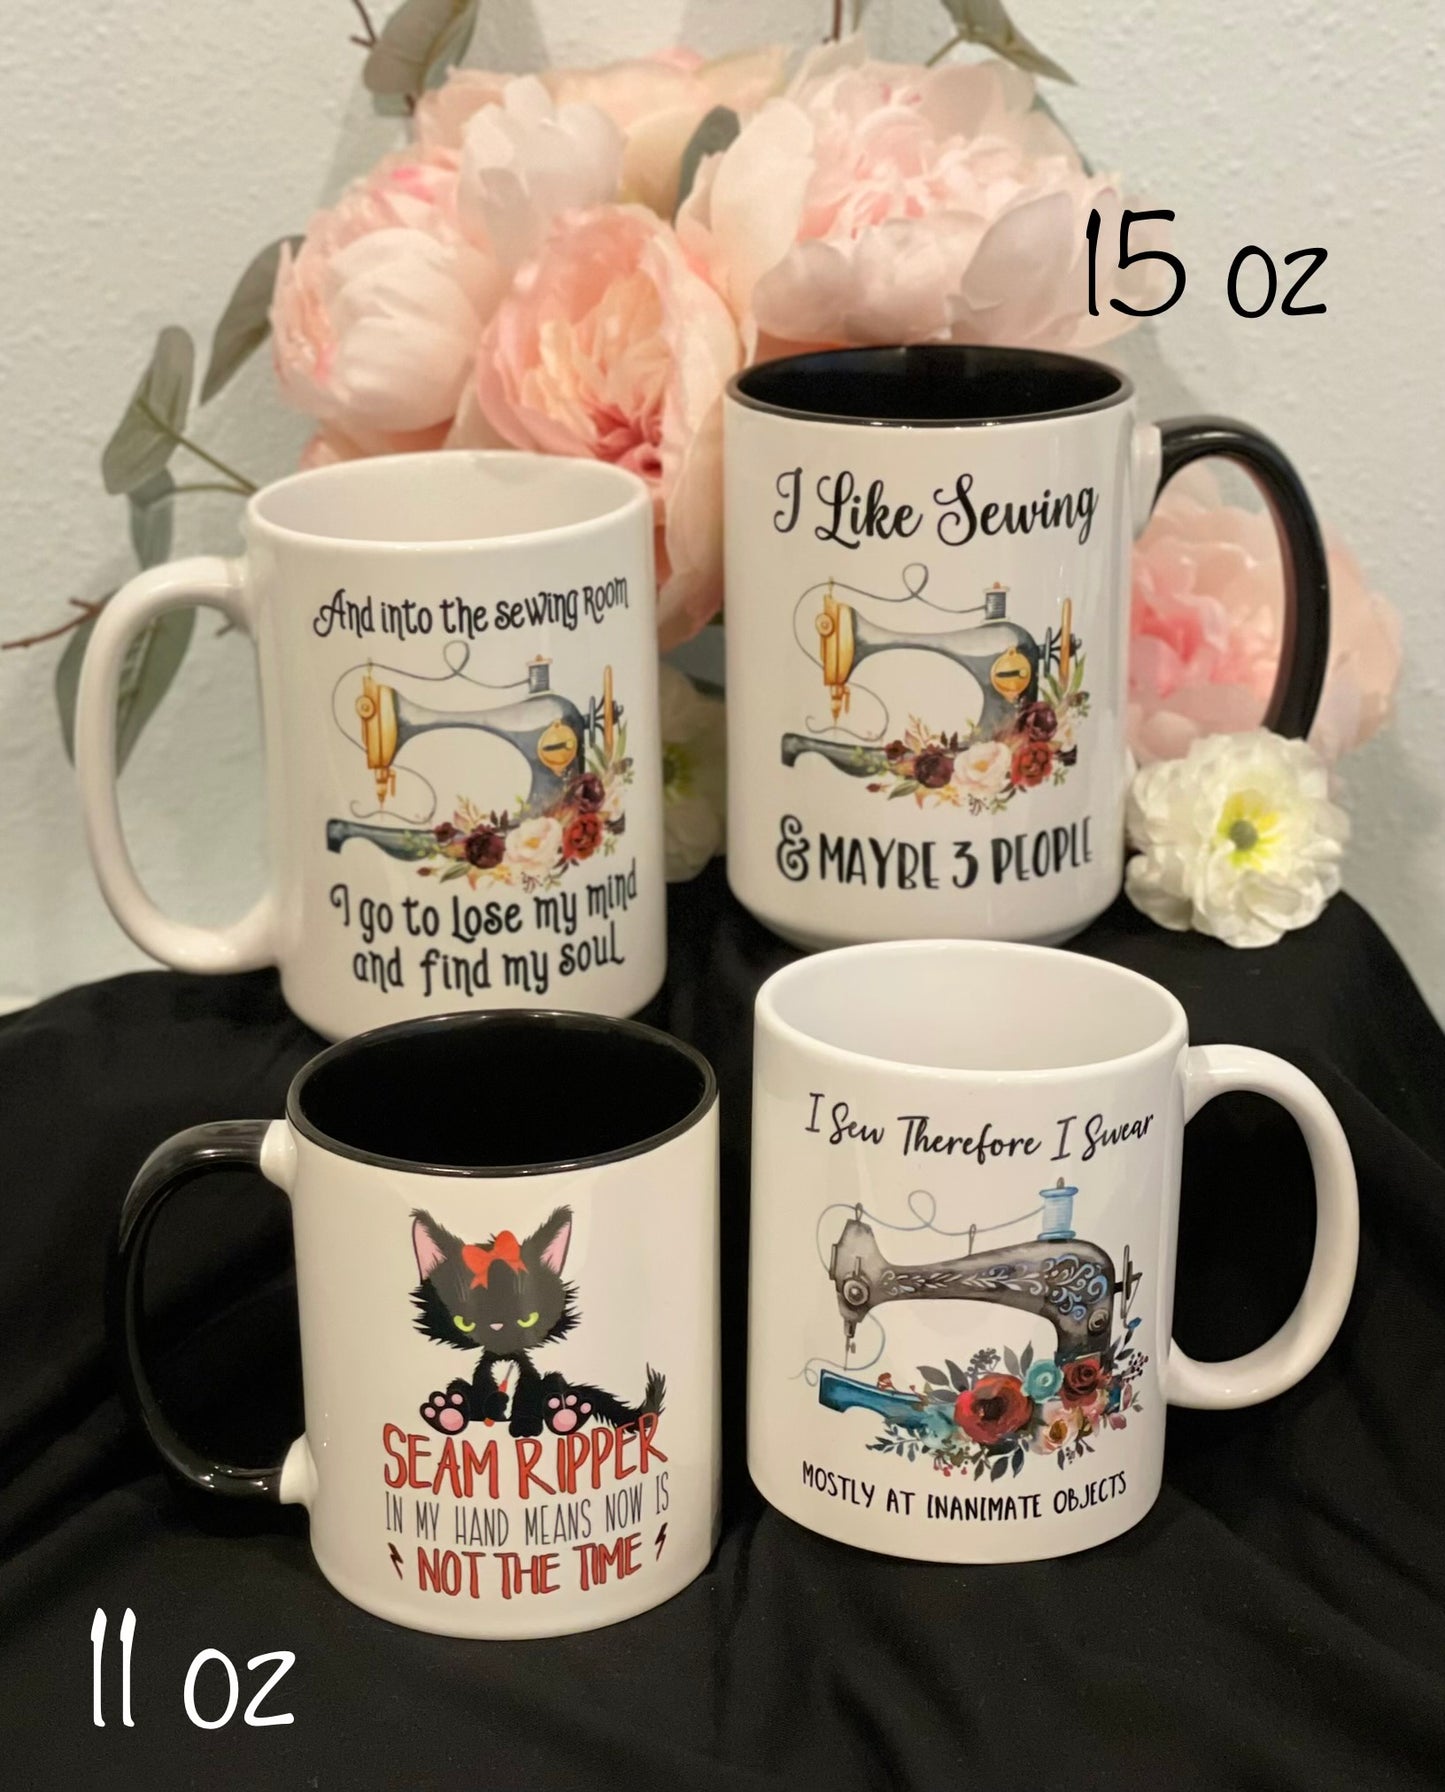 "Now is not the time" Sassy Kitty Coffee Mugs